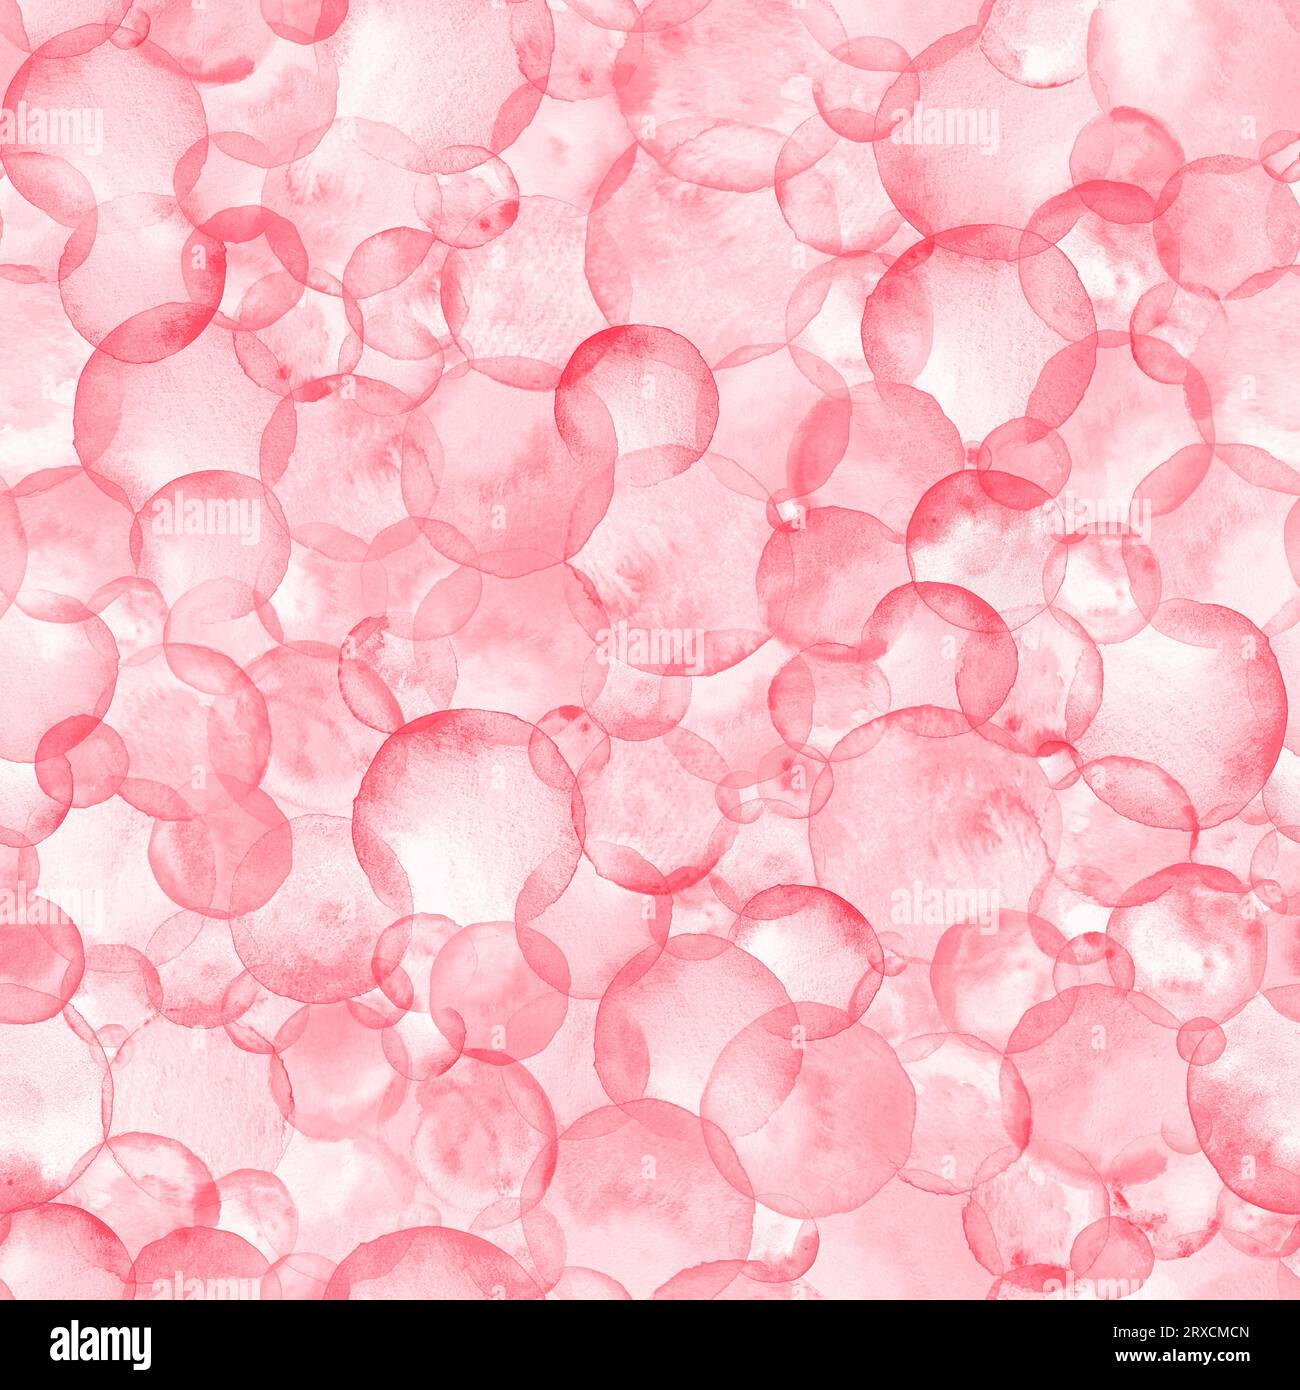 Abstract watercolor bubbles birthday party background. Hand drawn red pink color geometric shapes circles seamless pattern. Watercolour texture. Print Stock Photo